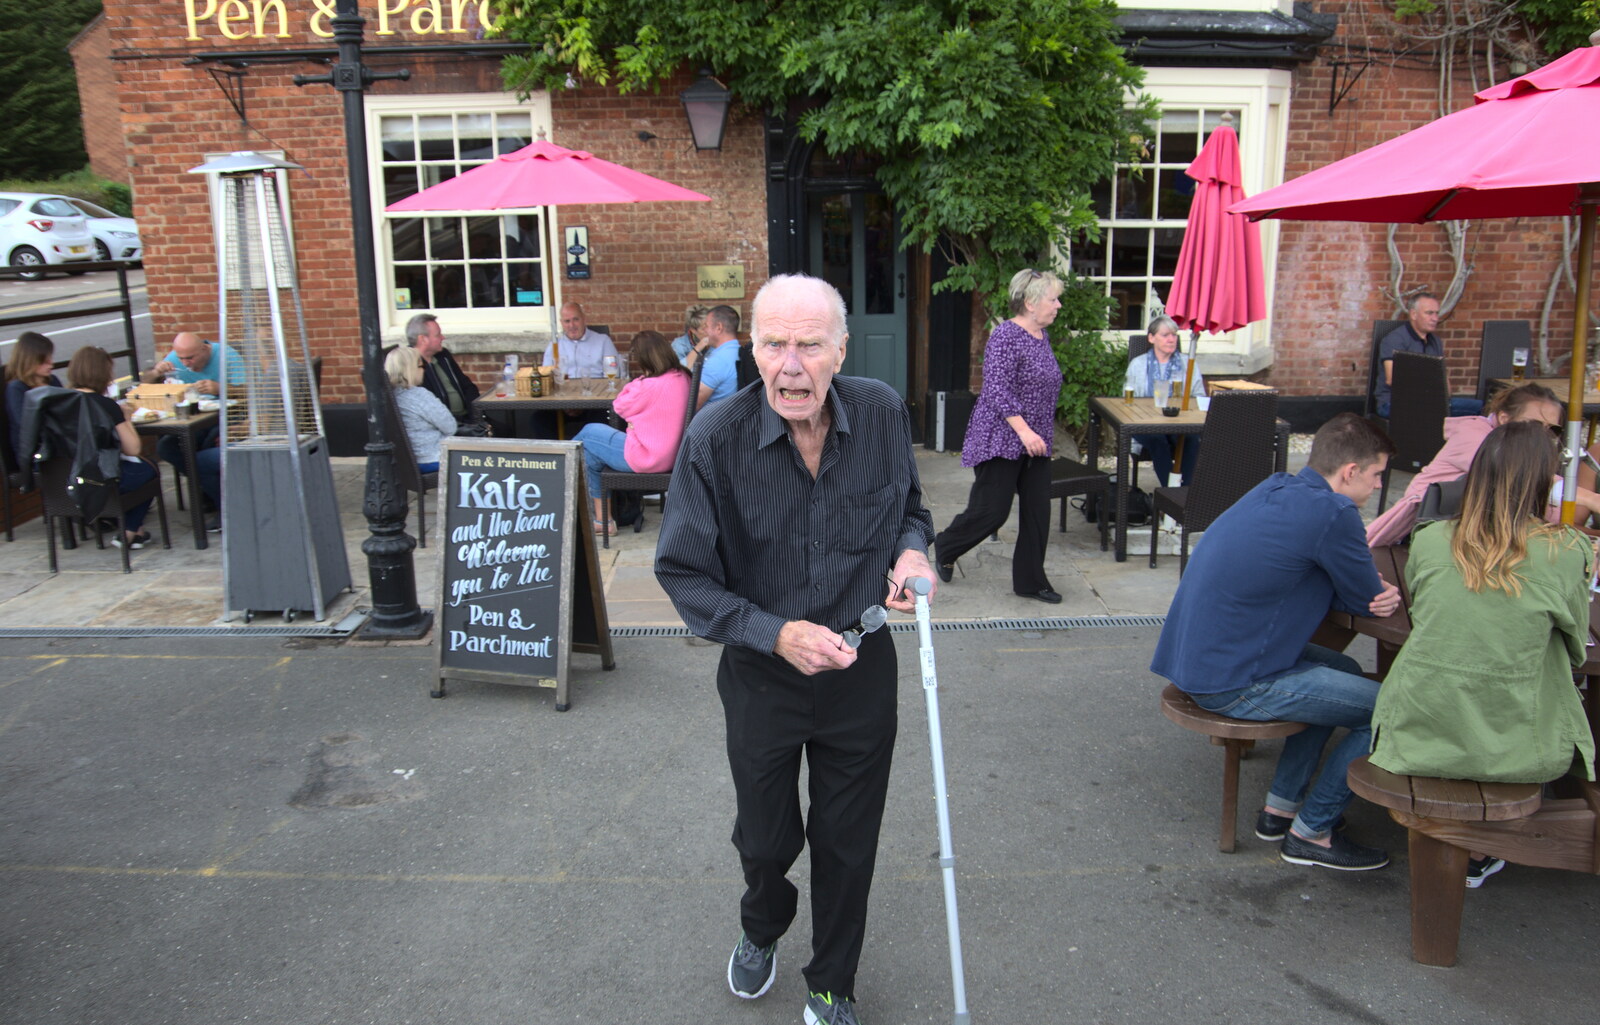 Grandad outside the Pen and Parchment from A Postcard from Stratford-upon-Avon, Warwickshire - 9th September 2018